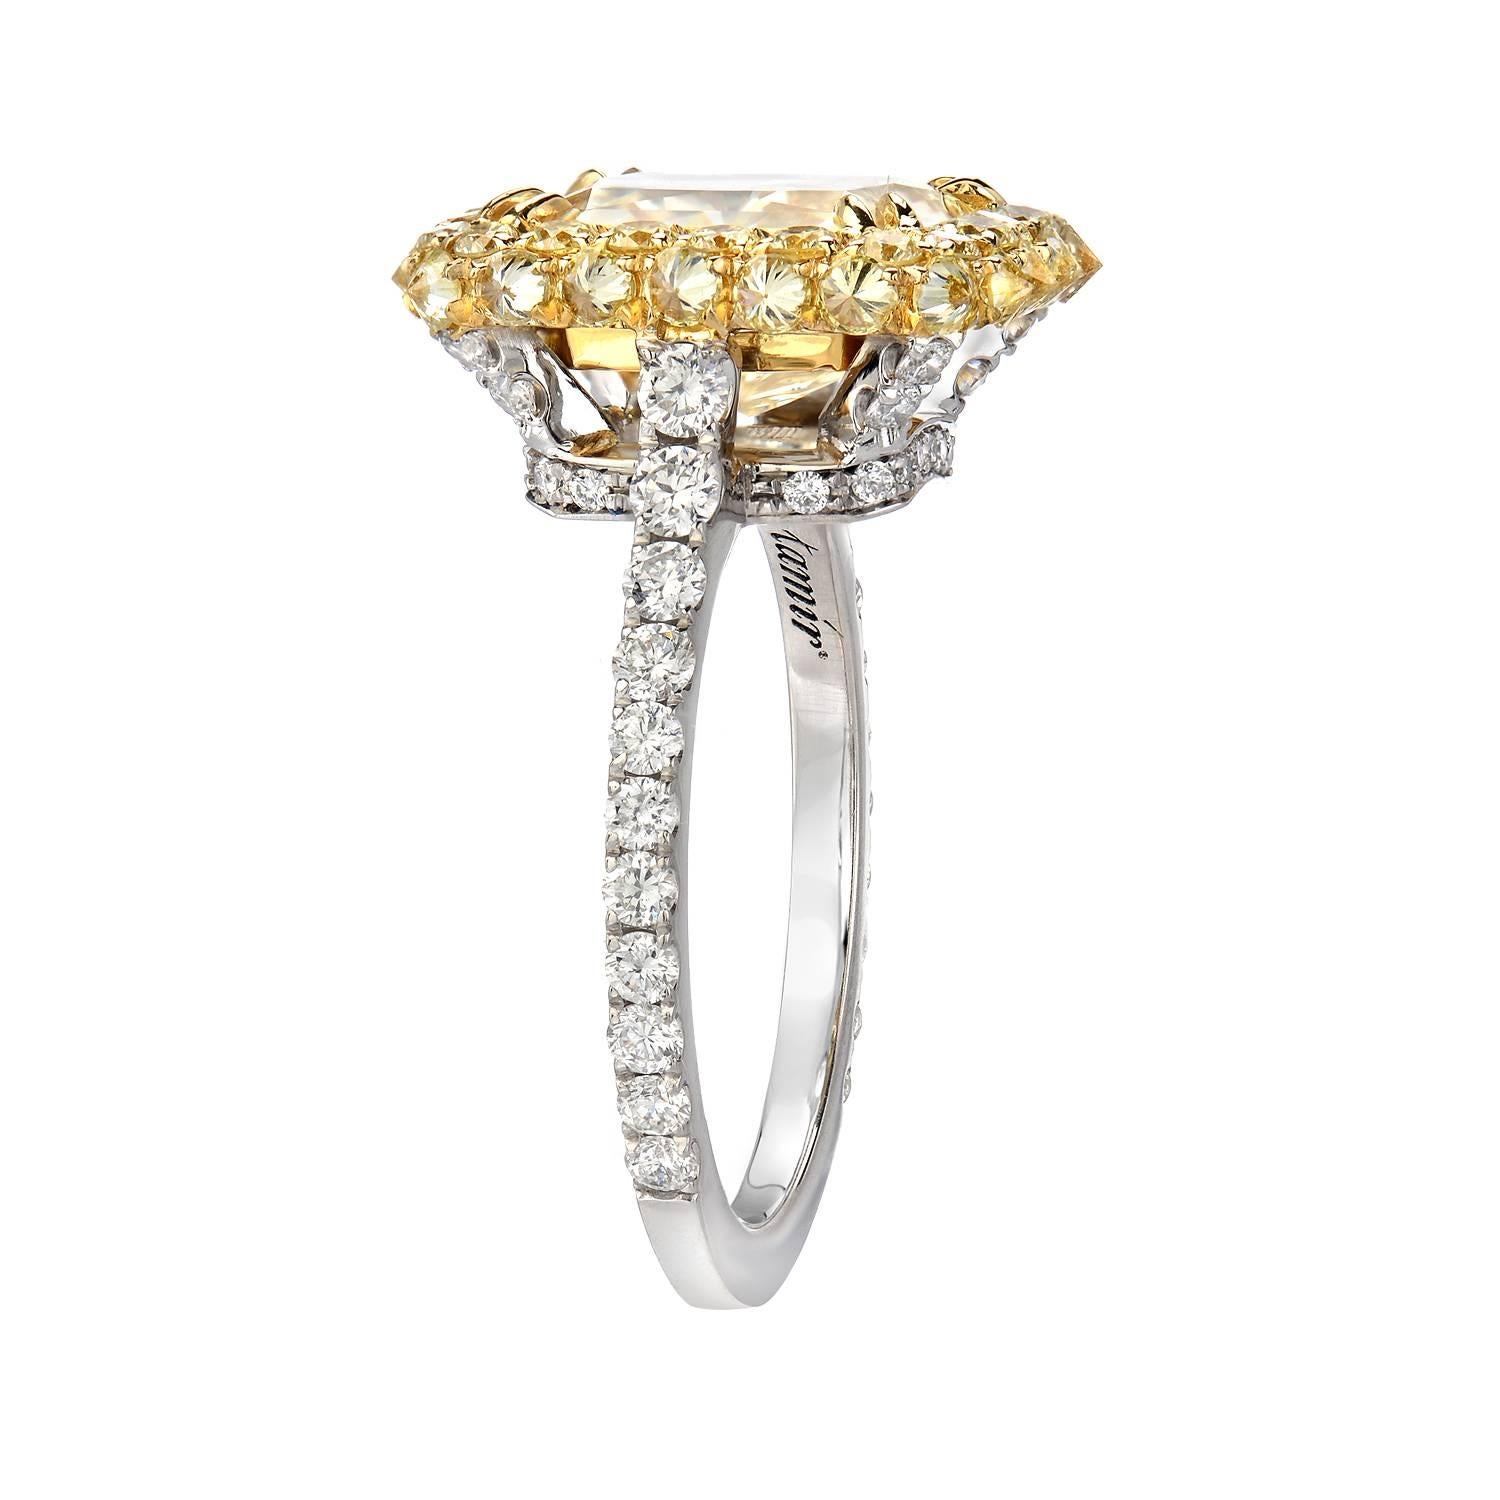 State of the art platinum and 18K yellow gold ring, centered by an exceptional 3.78 carat Fancy Light Yellow Diamond, VS2 clarity, surrounded by a total of 0.88 carat round brilliant yellow diamonds, set inversely on the sides, and a total of 0.66